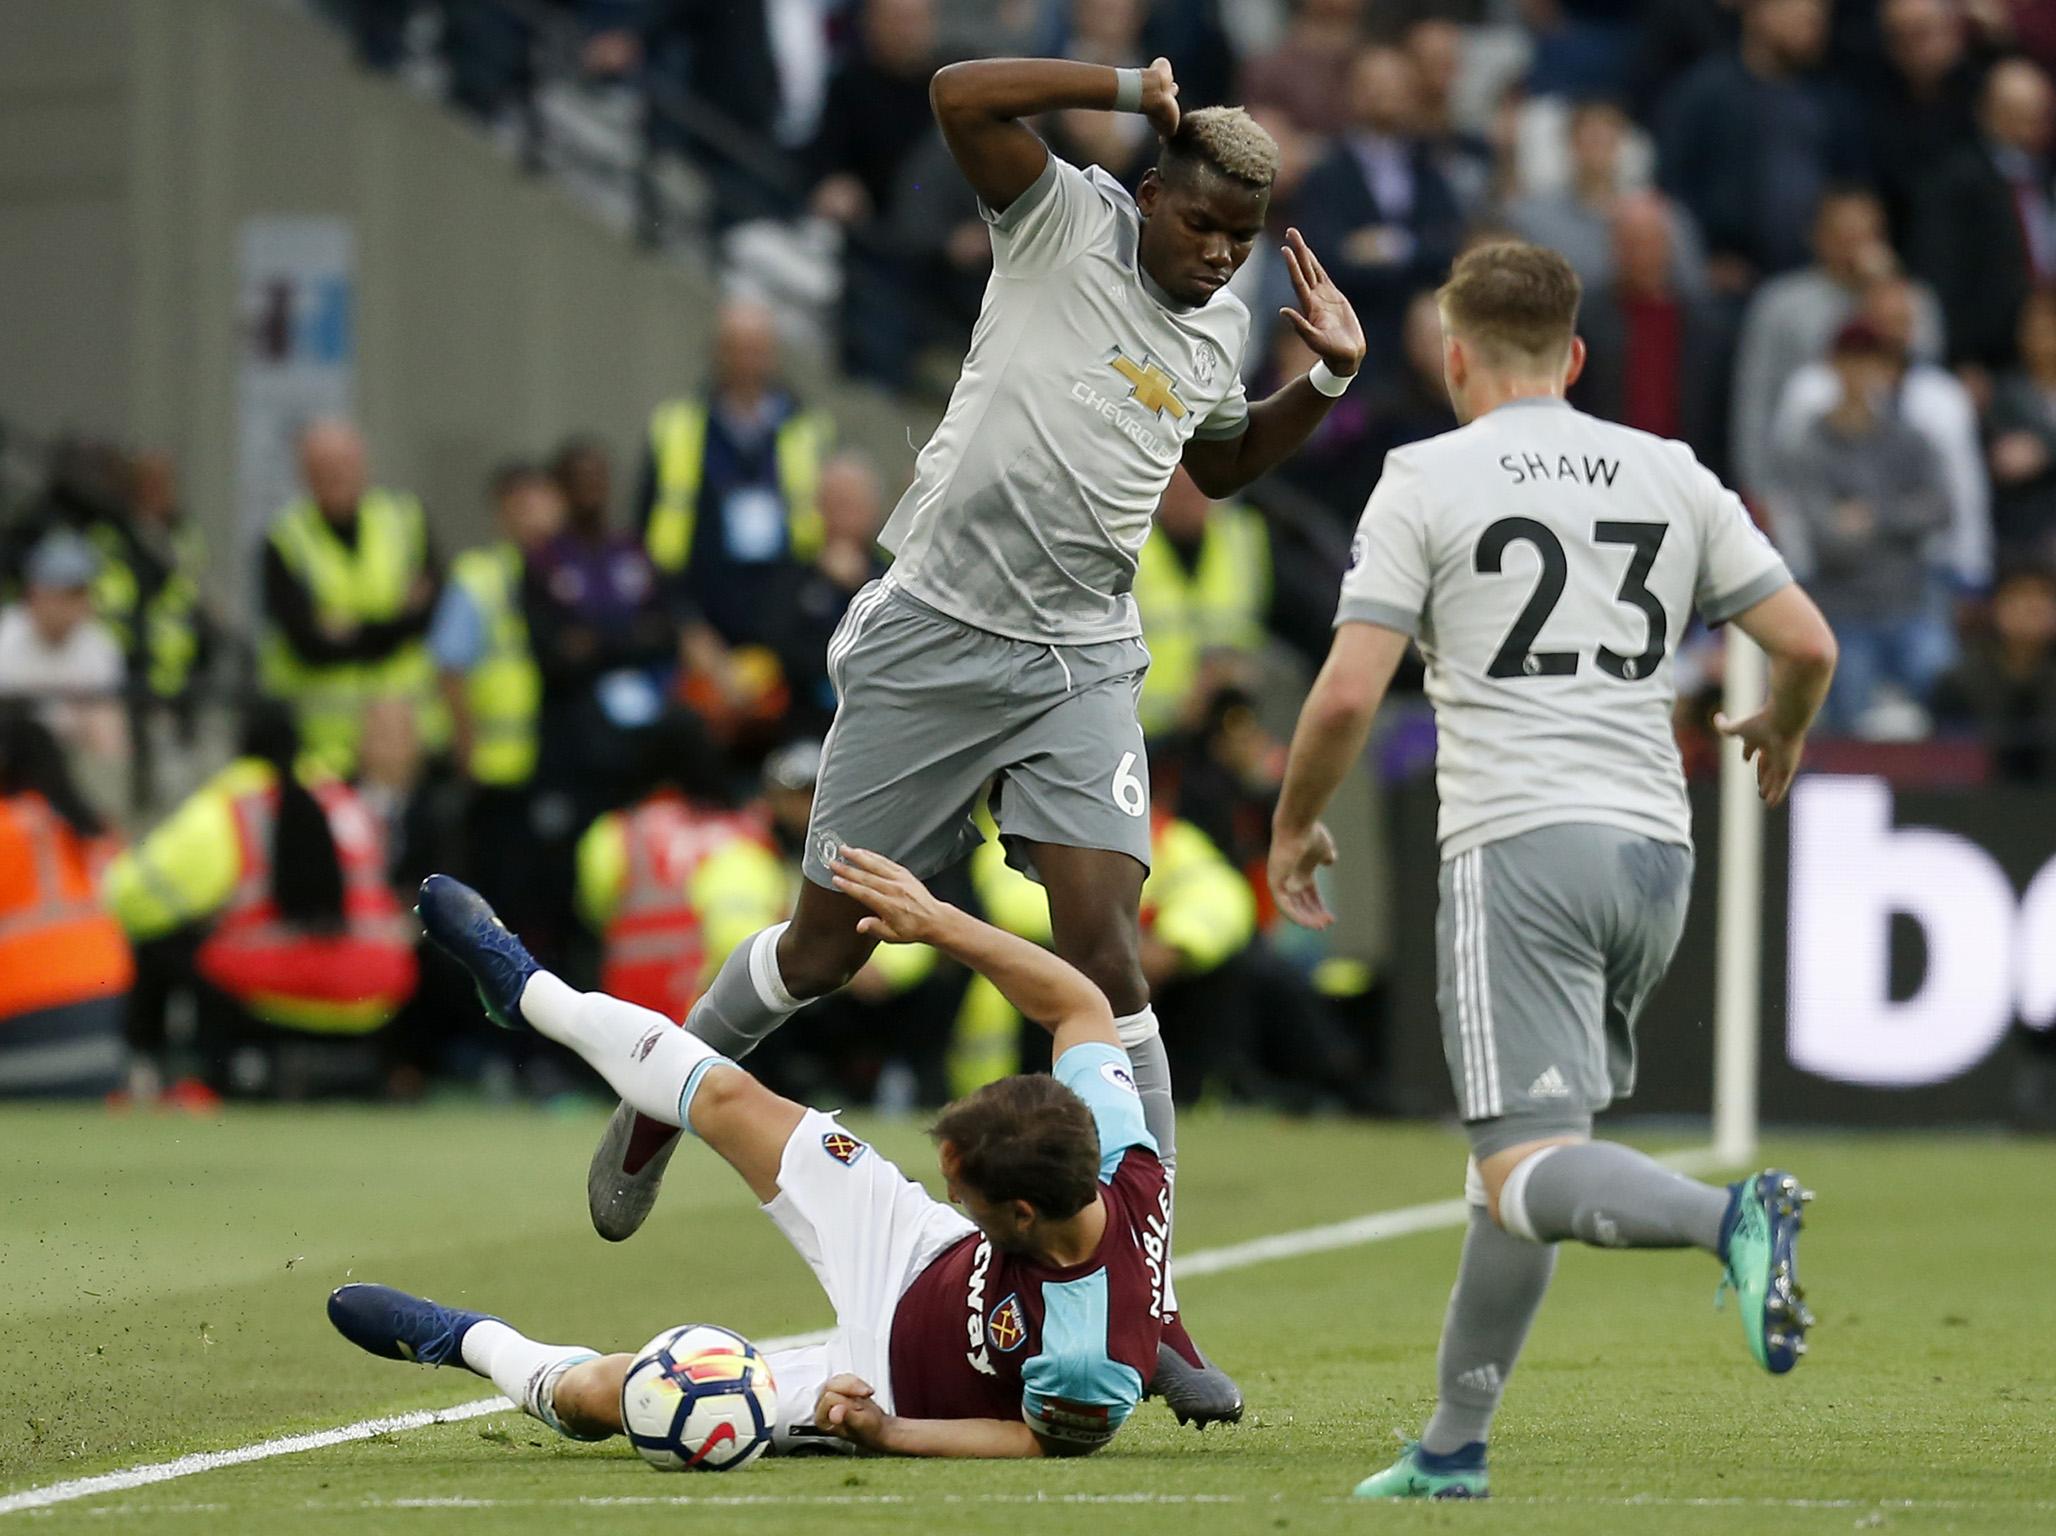 West Ham and Manchester United play out dreary Premier League stalemate